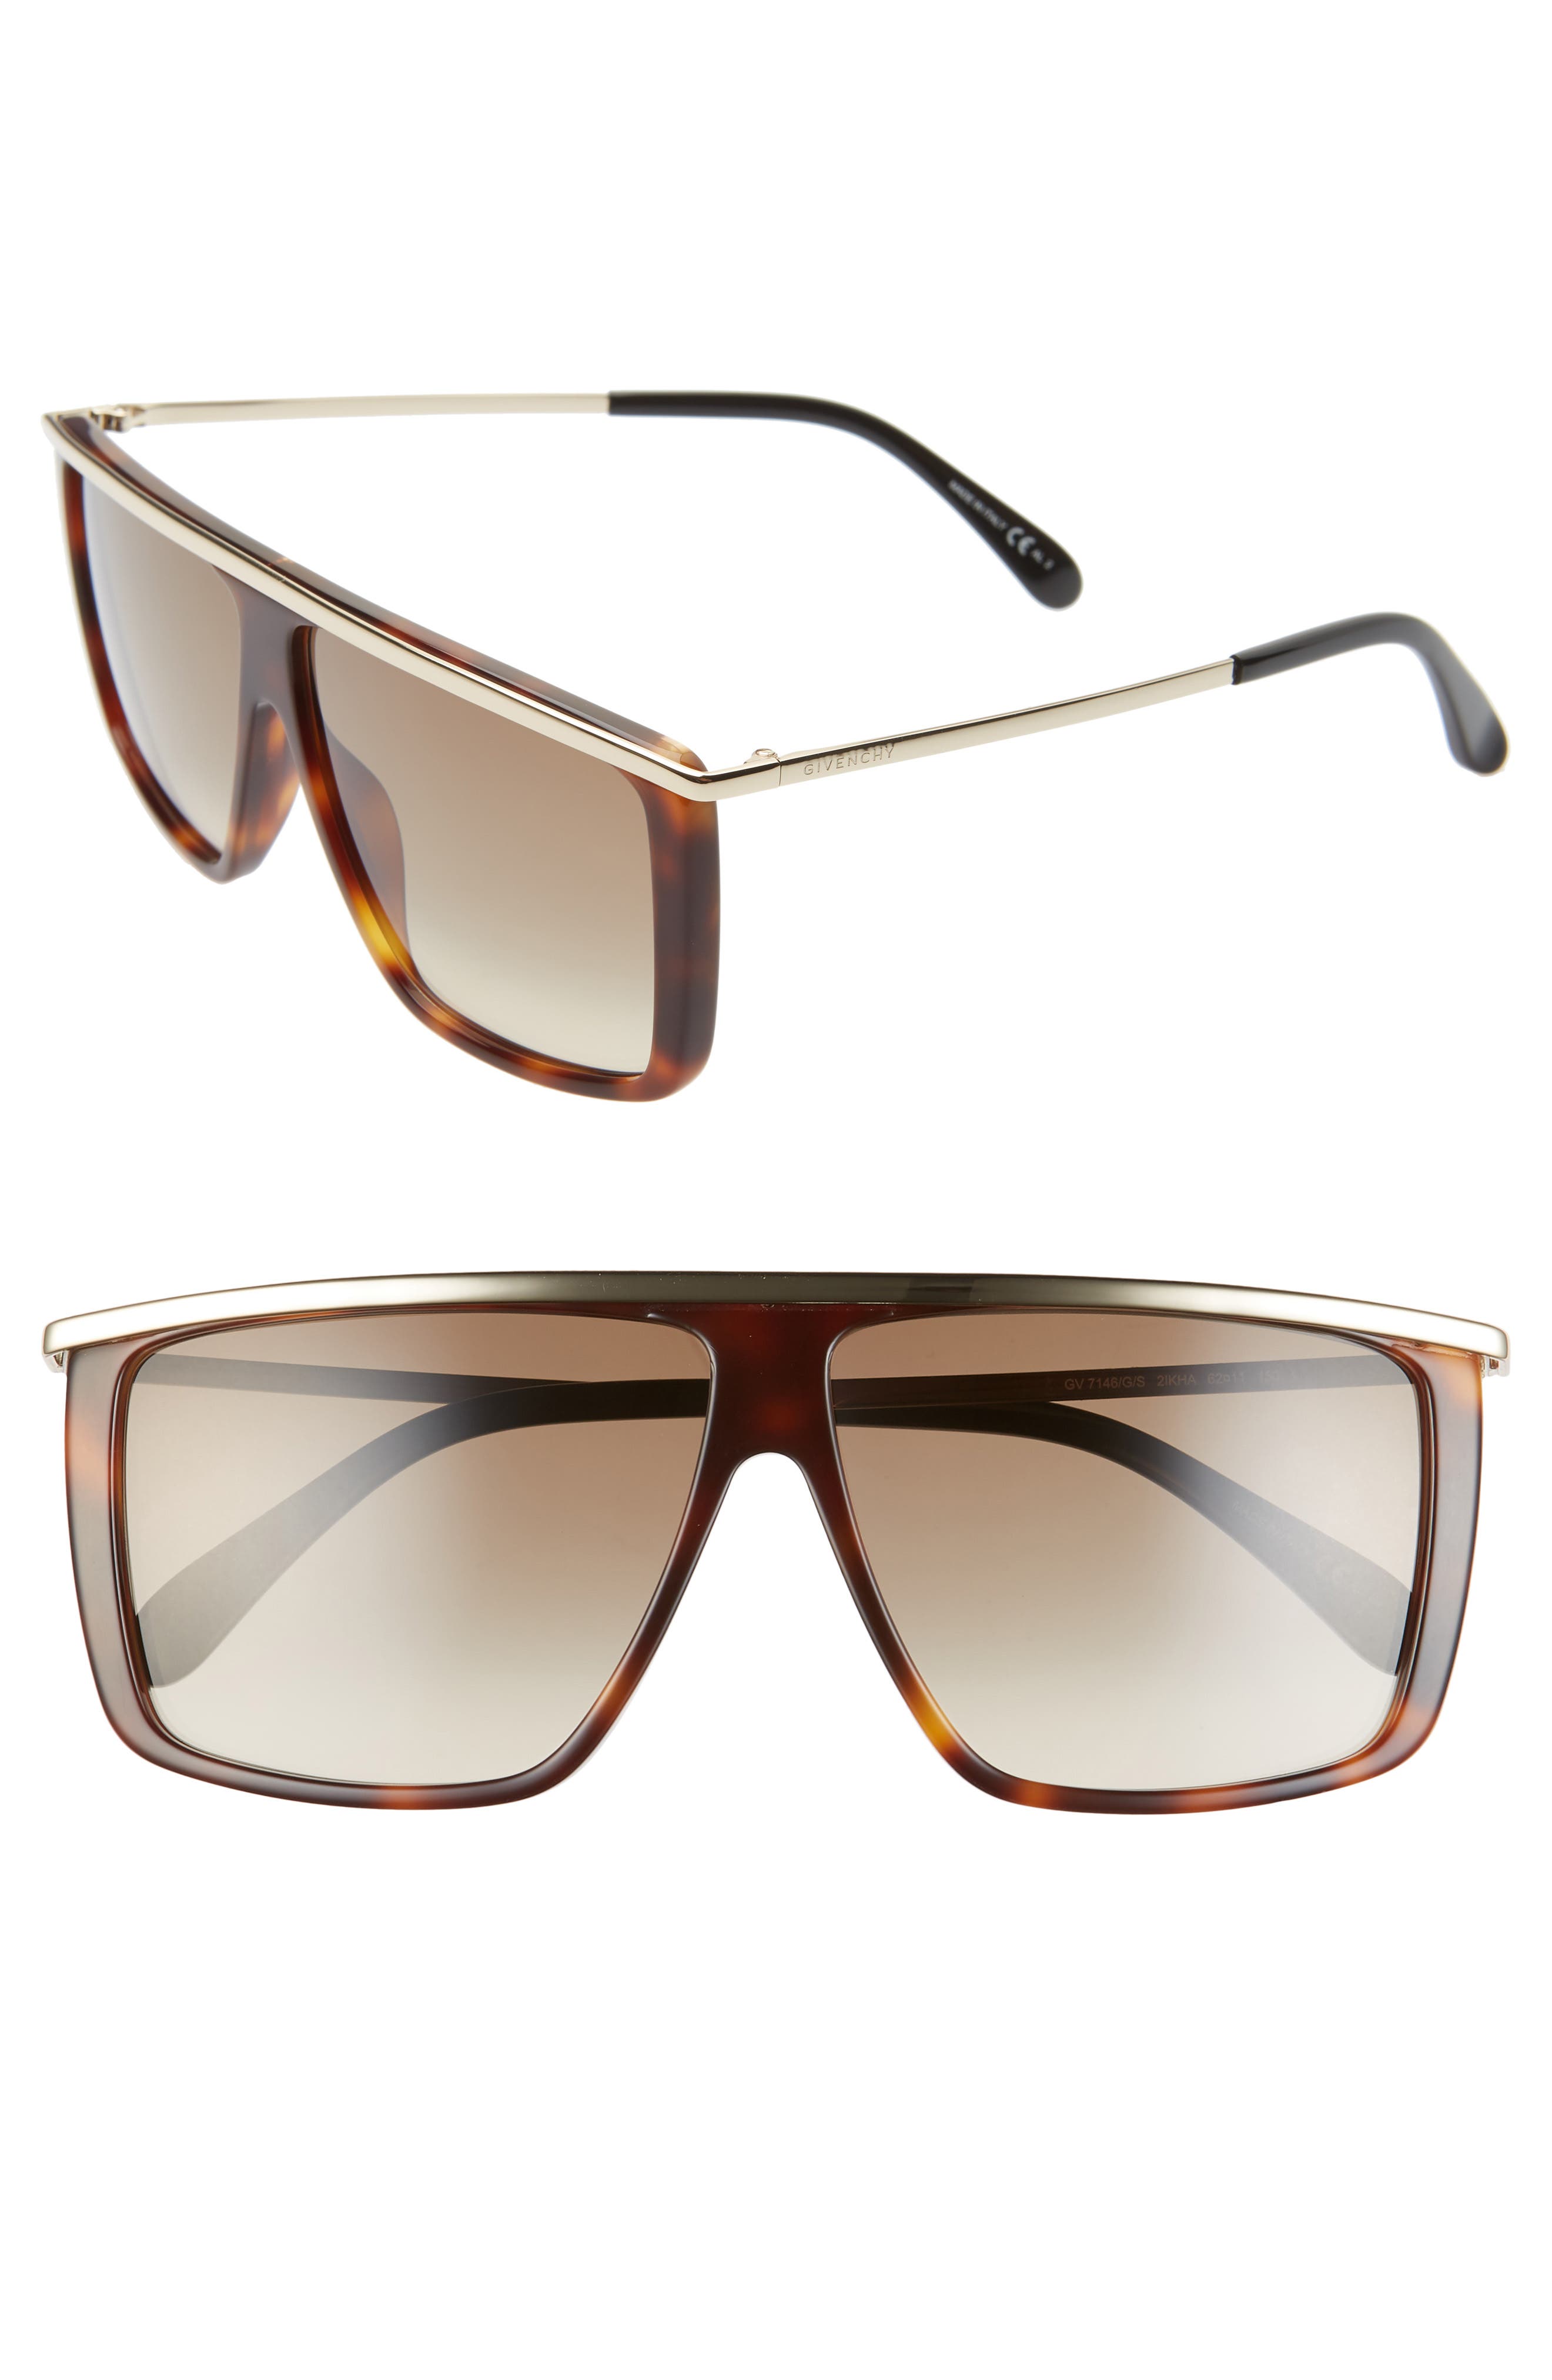 givenchy sunglasses price